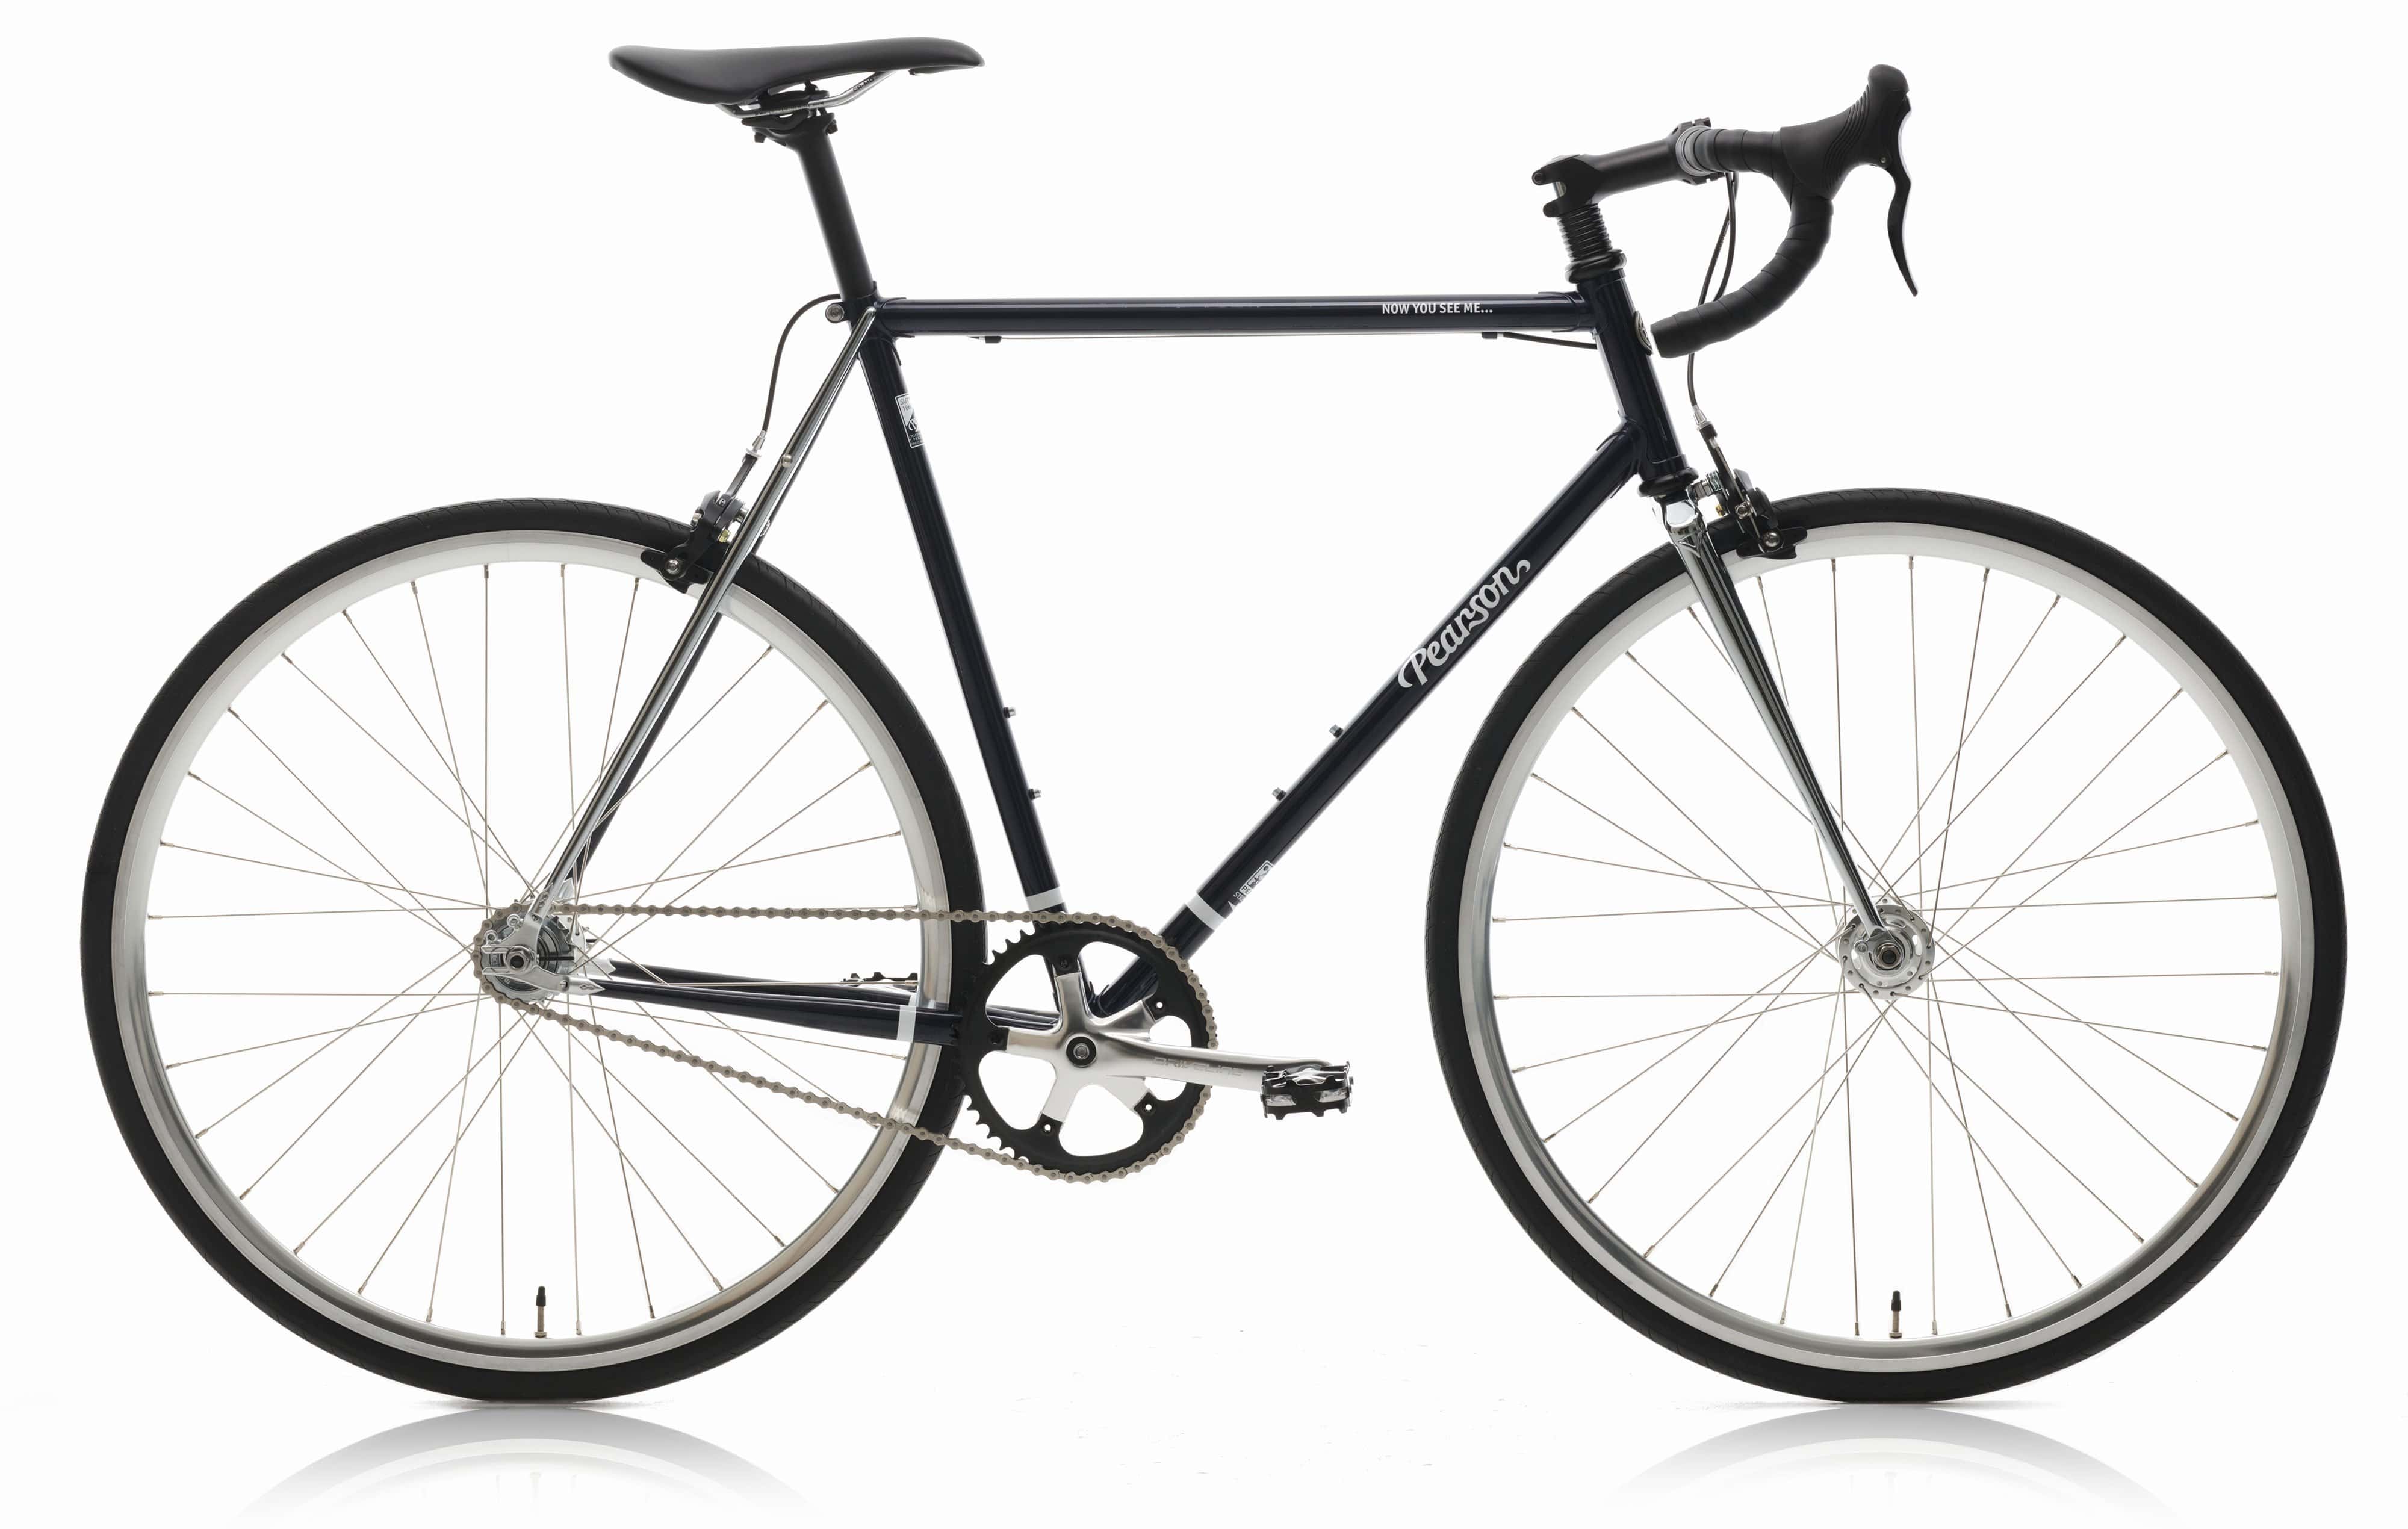 Pcs  Now You See Me - Steel Single Speed Bike  Continental Gator Hardshell 28mm / With Mudguards / Xx-large